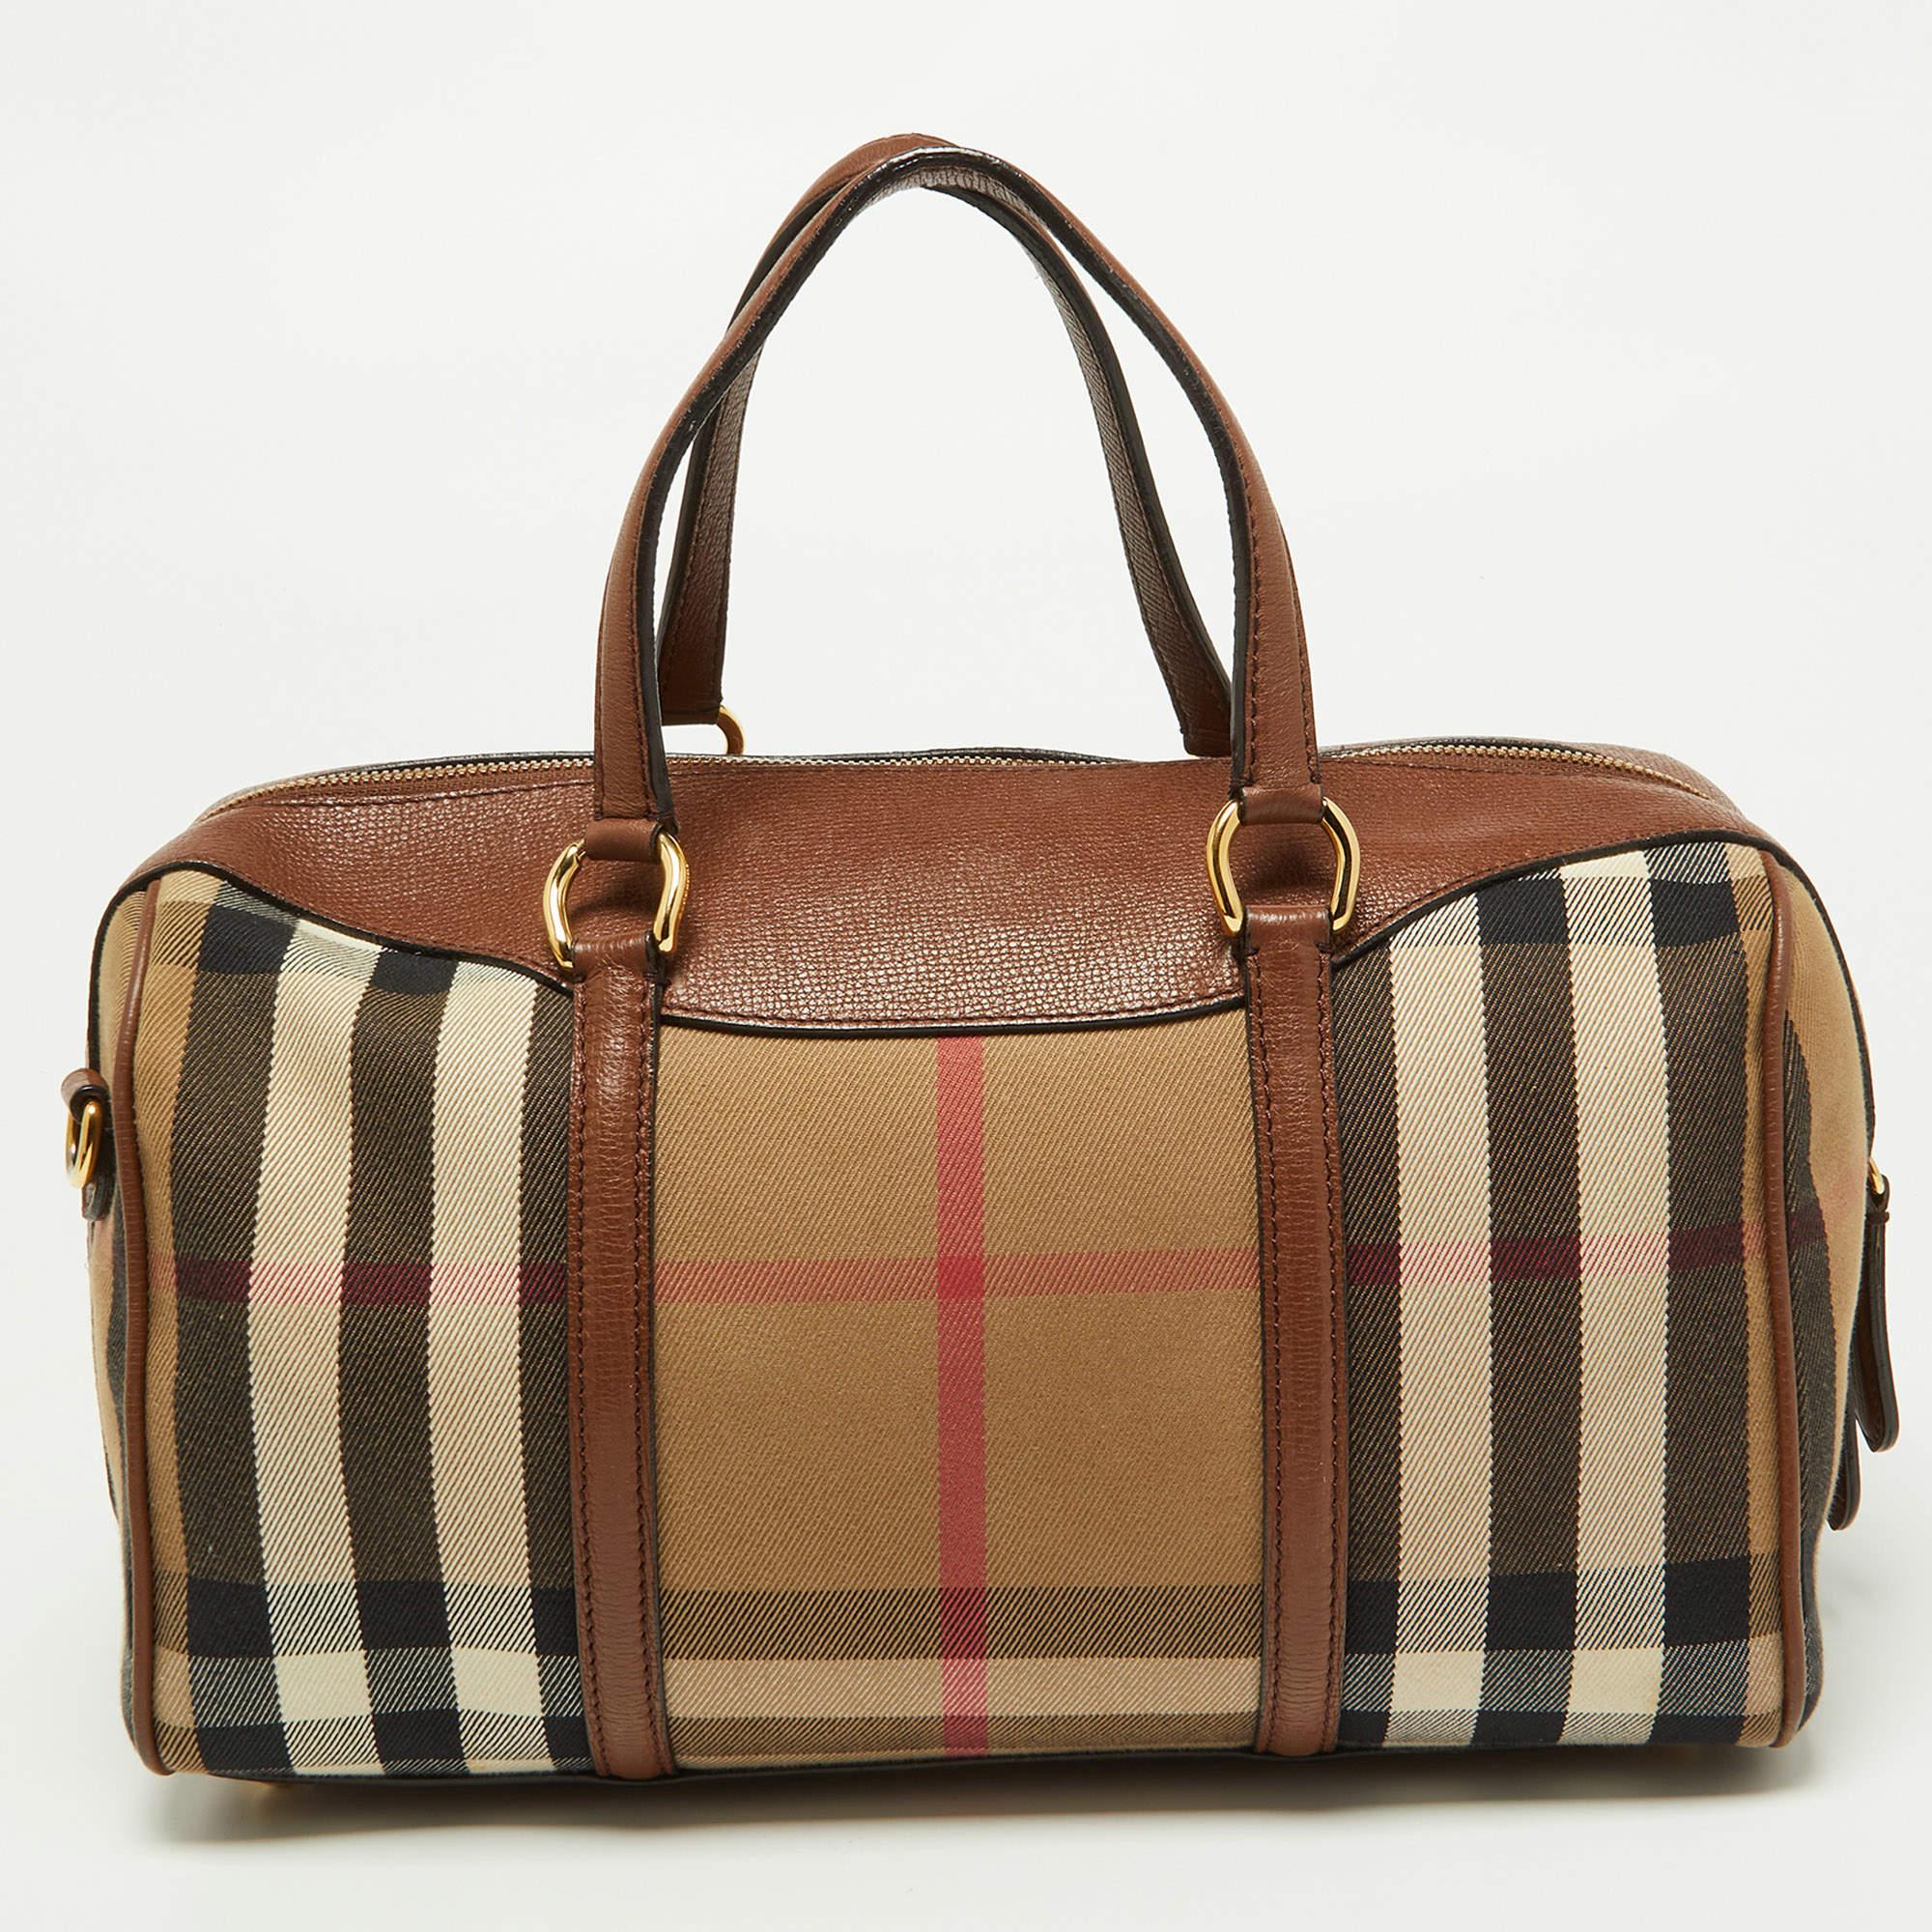 A stunning blend of autumn colors in leather & Nova check coated canvas makes this Burberry Alchester Bowler Bag an instant classic. Ideal for your everyday essentials, this barrel-shaped bag features dual handles, a removable shoulder strap, and